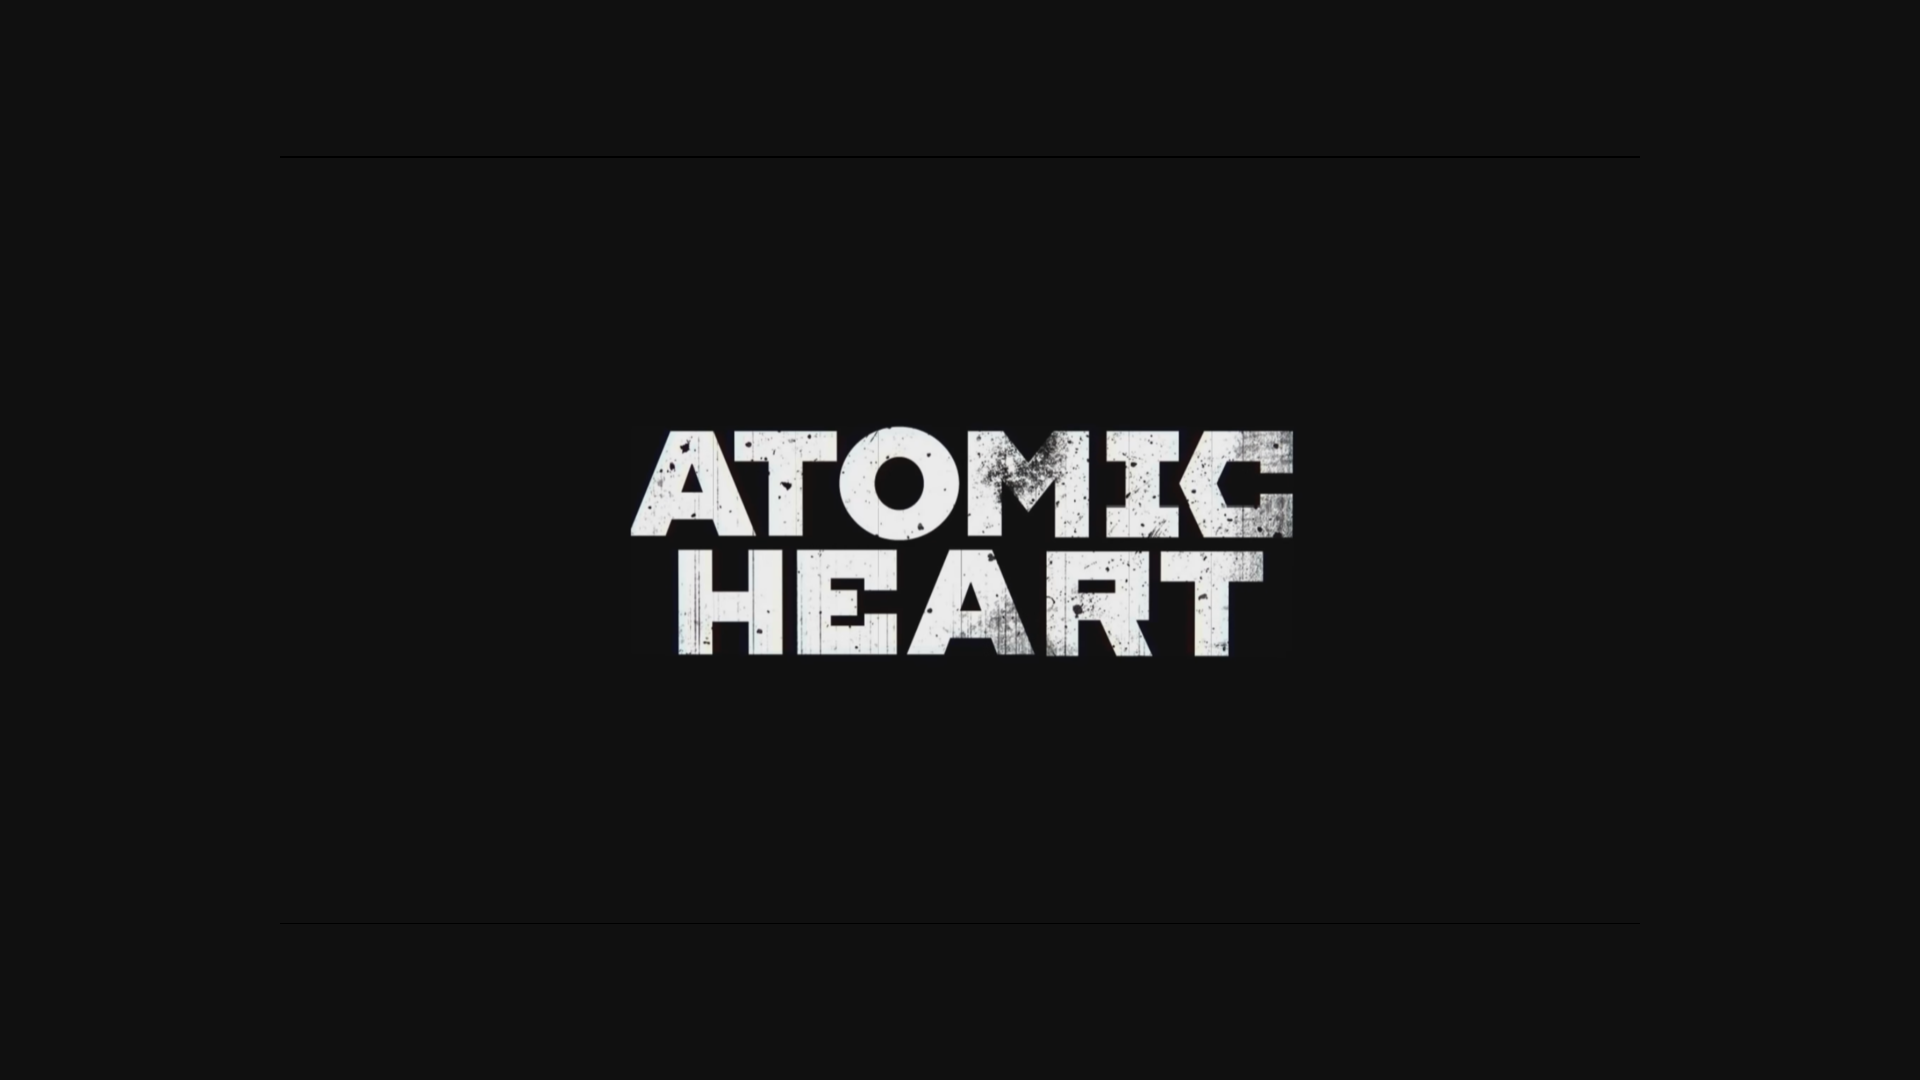 wtf is atomic heart about